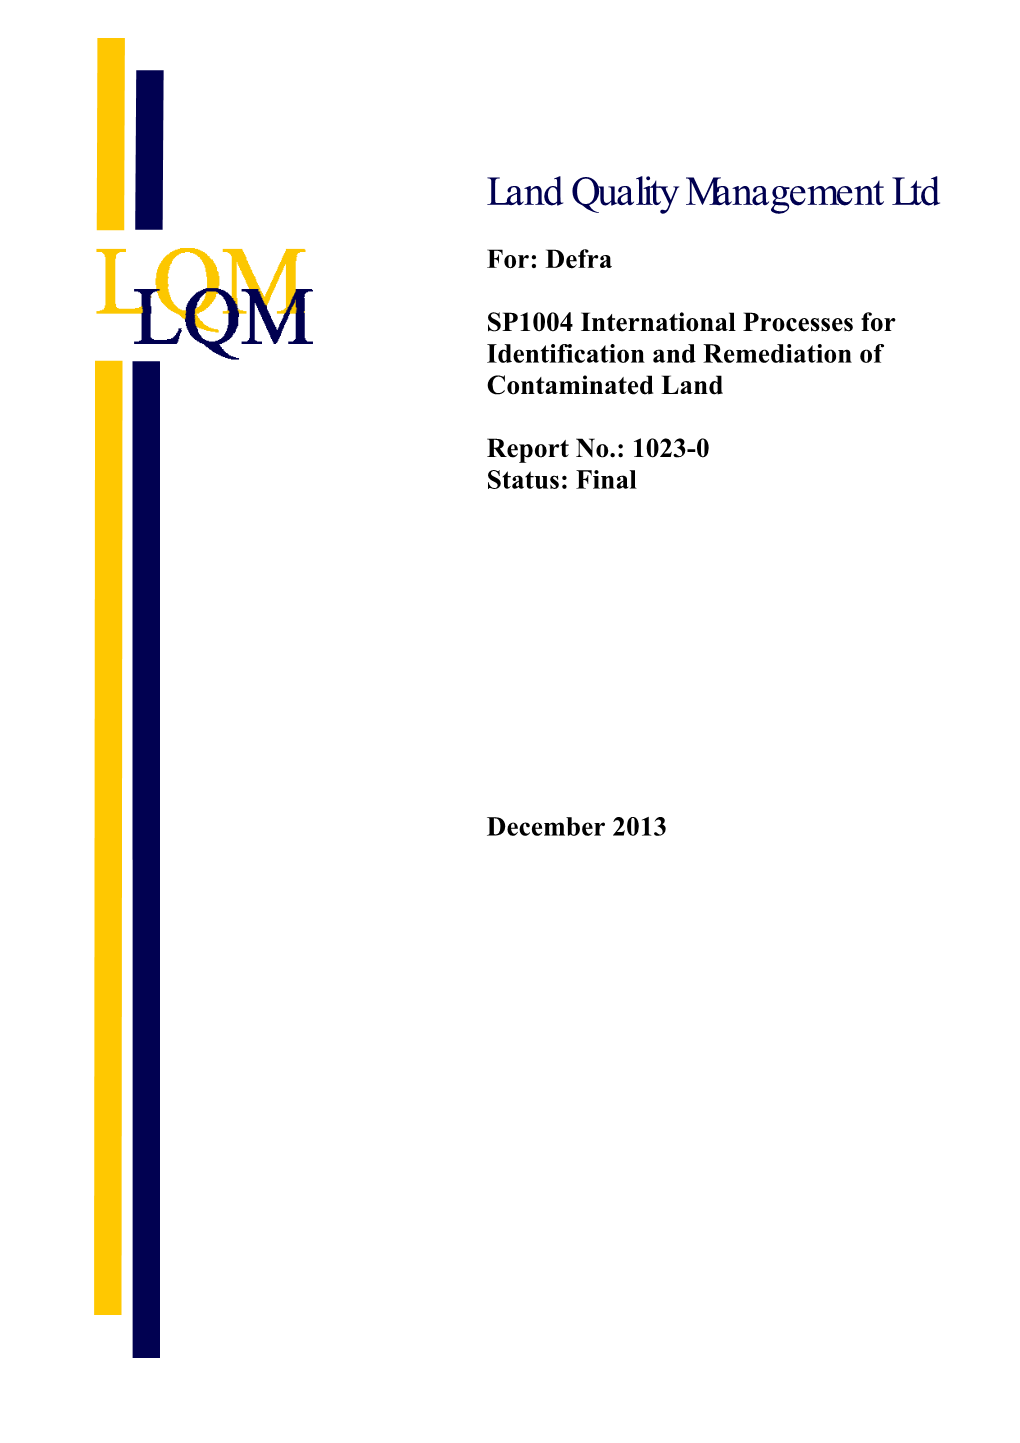 SP1004 International Processes for Identification and Remediation of Contaminated Land